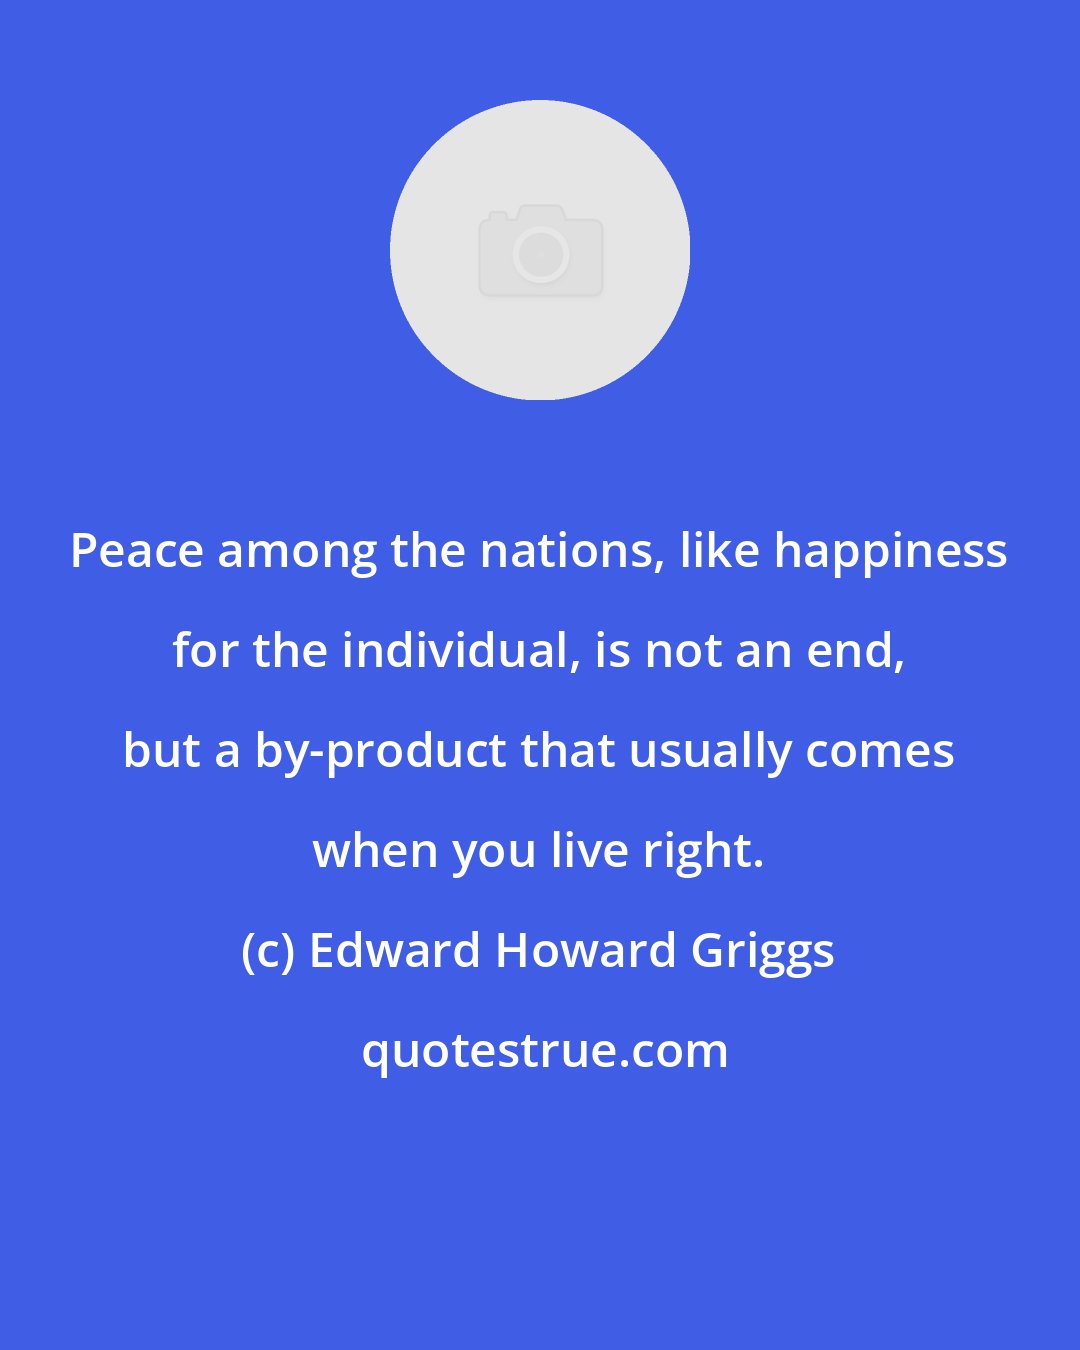 Edward Howard Griggs: Peace among the nations, like happiness for the individual, is not an end, but a by-product that usually comes when you live right.